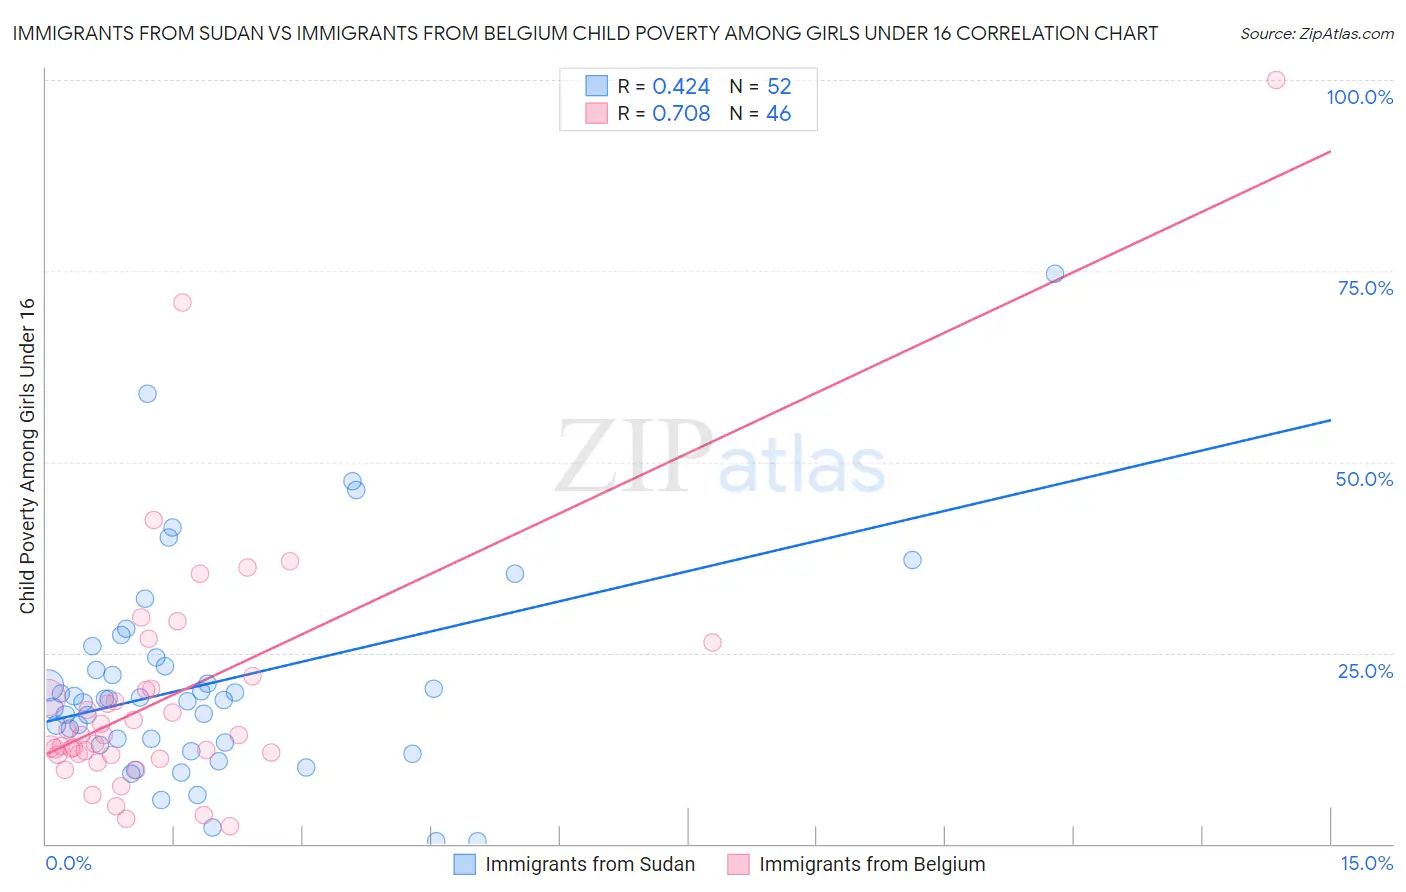 Immigrants from Sudan vs Immigrants from Belgium Child Poverty Among Girls Under 16